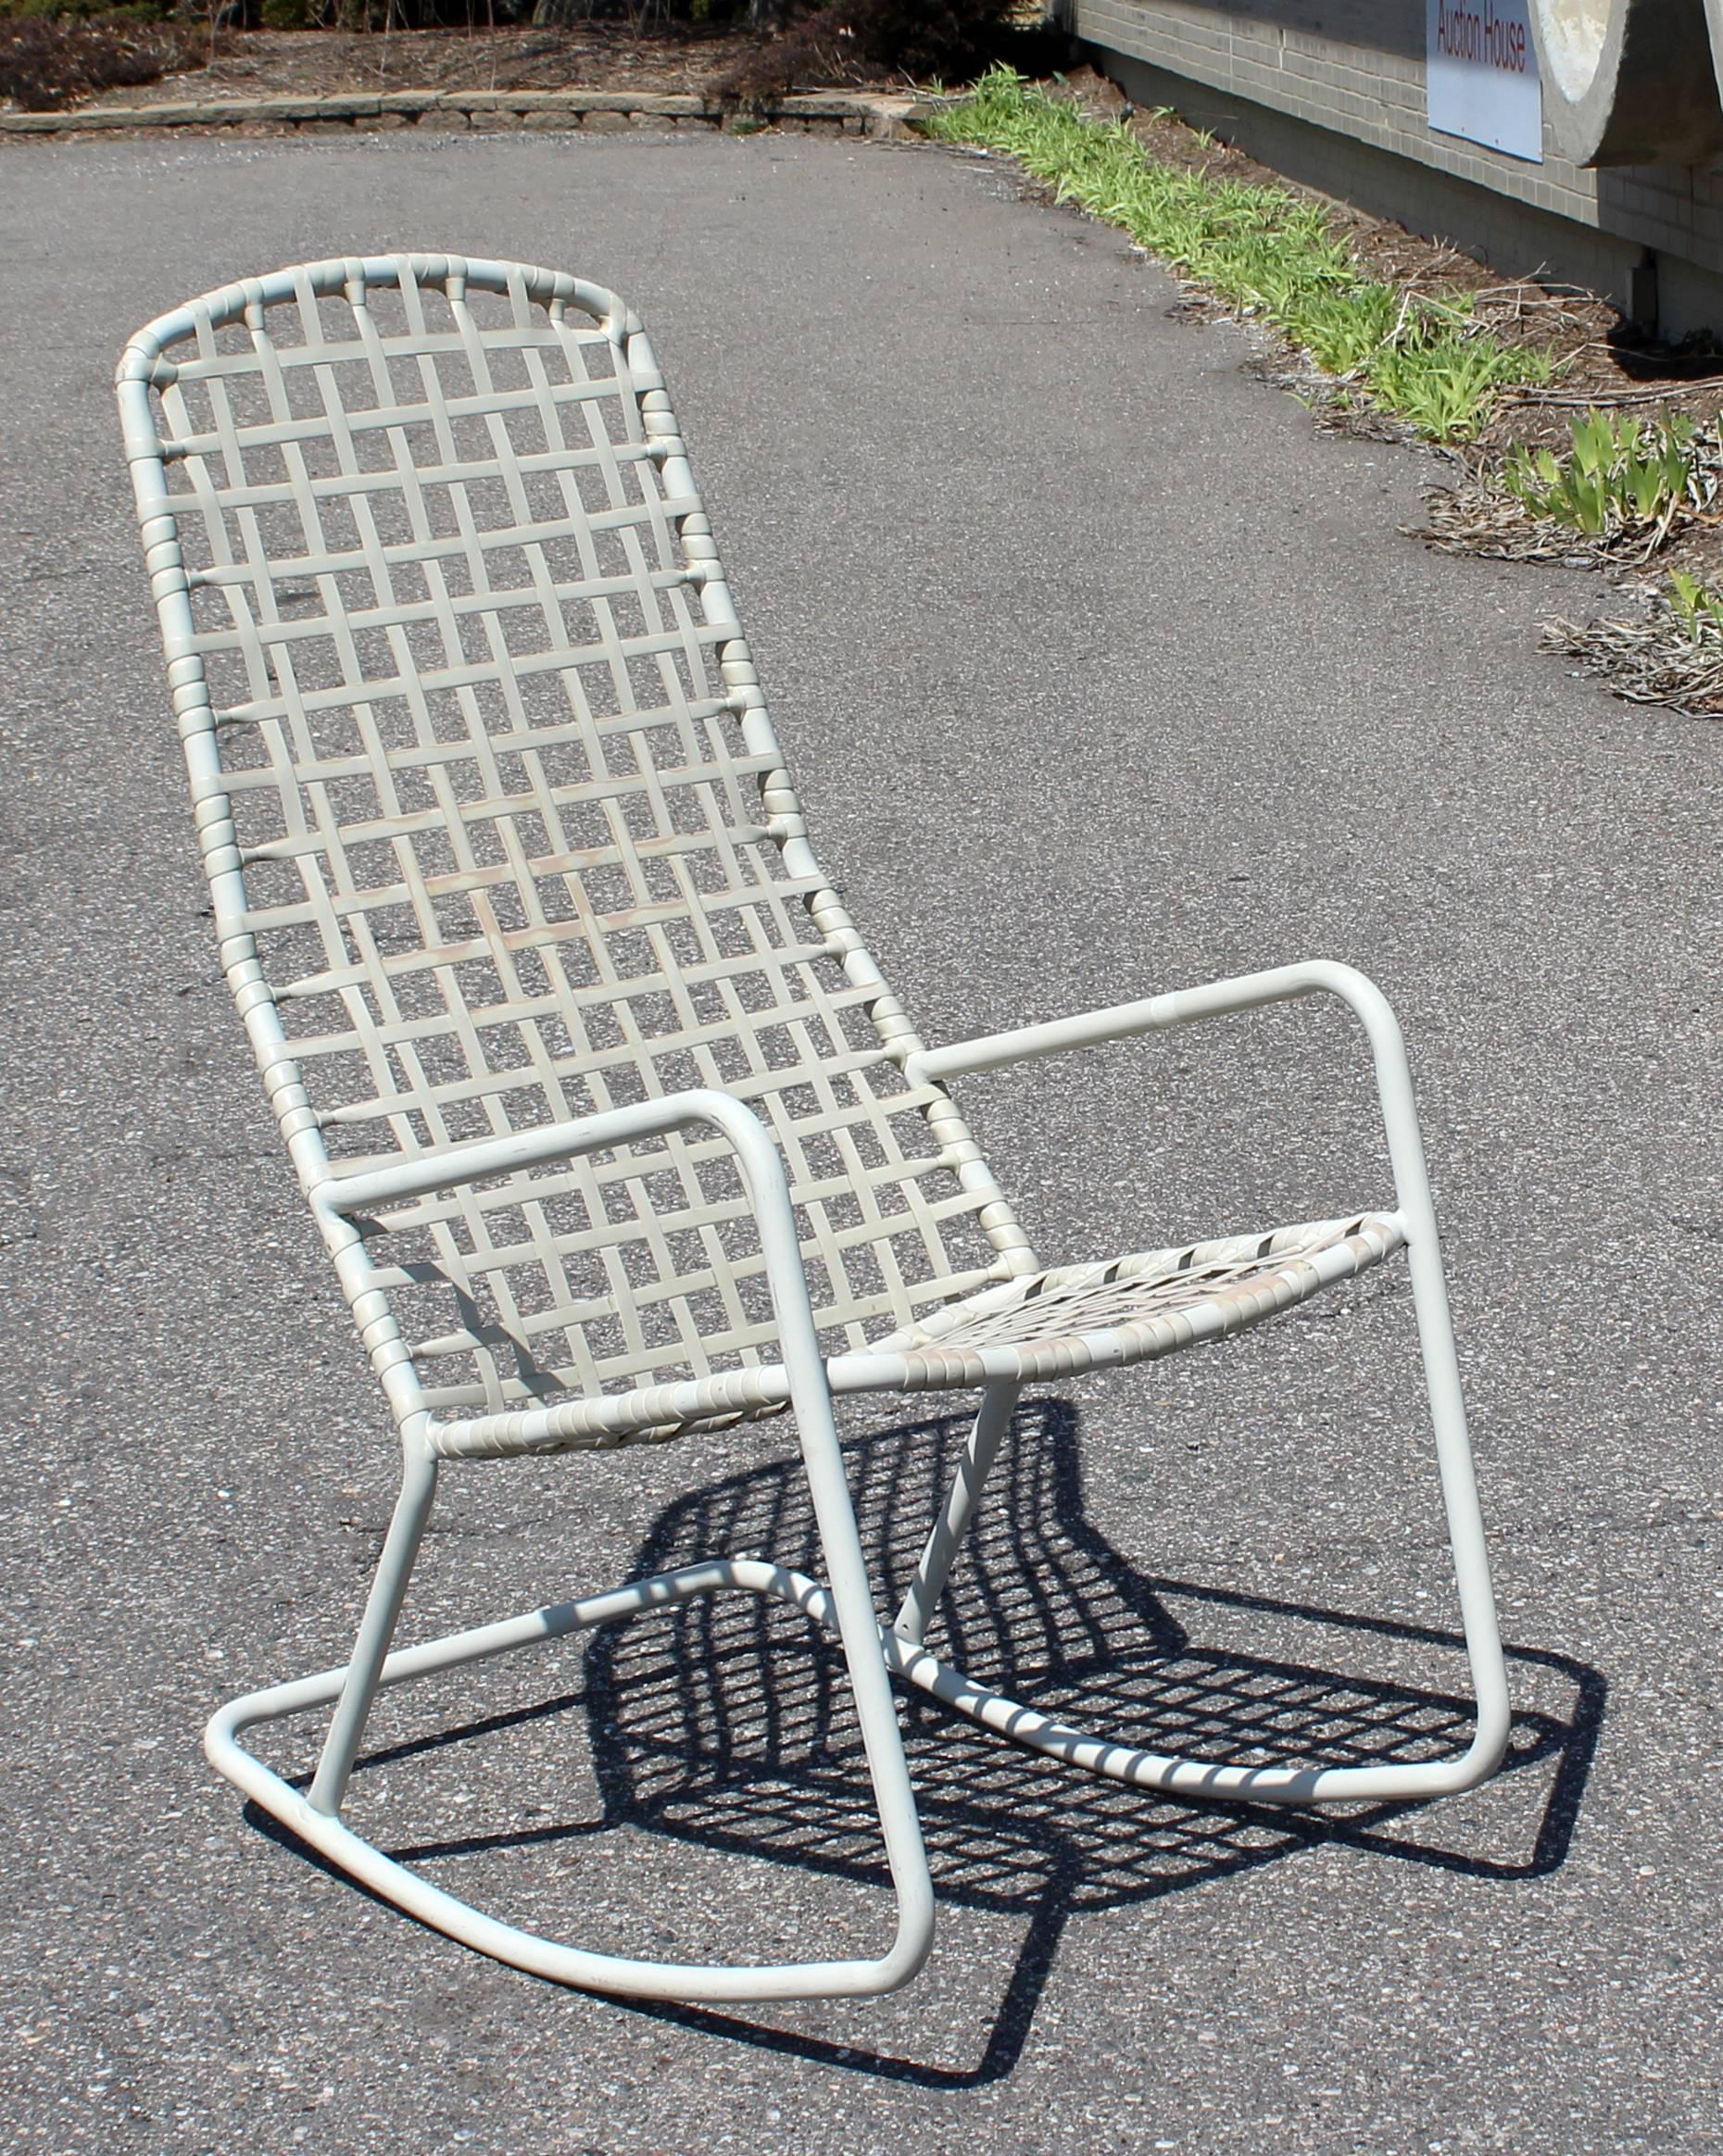 For your consideration is an outdoor patio rocking chair by Brown Jordan from the Kantan series, circa the 1960s. In excellent condition, however straps are slightly discolored. The dimensions are 21